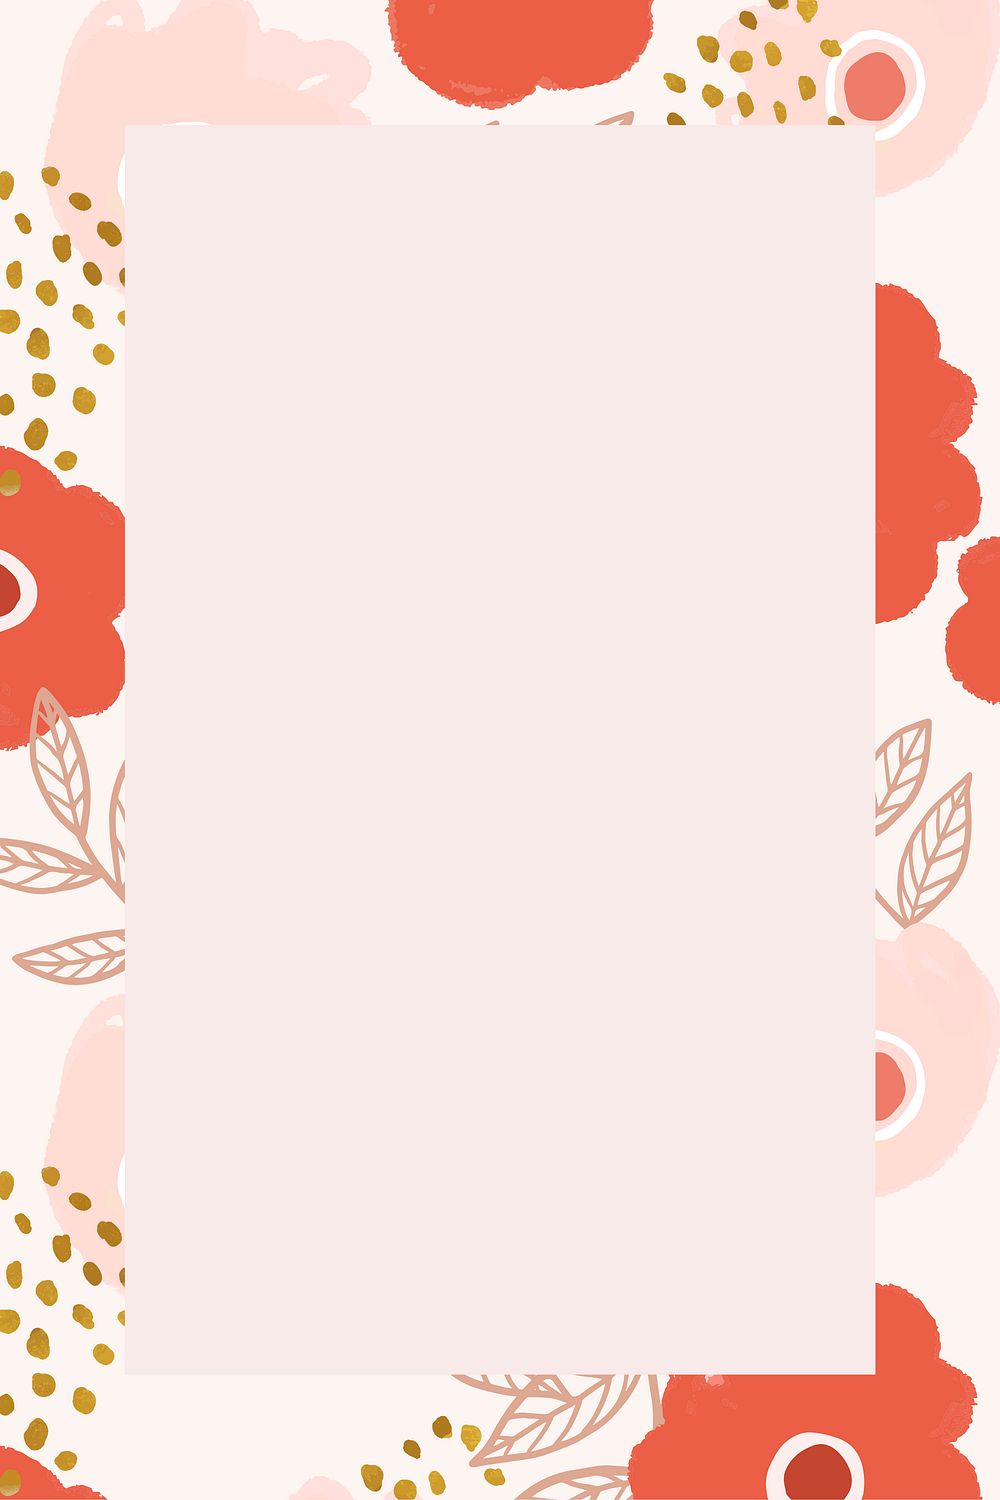 Blooming flower rectangle frame psd | Free PSD - rawpixel